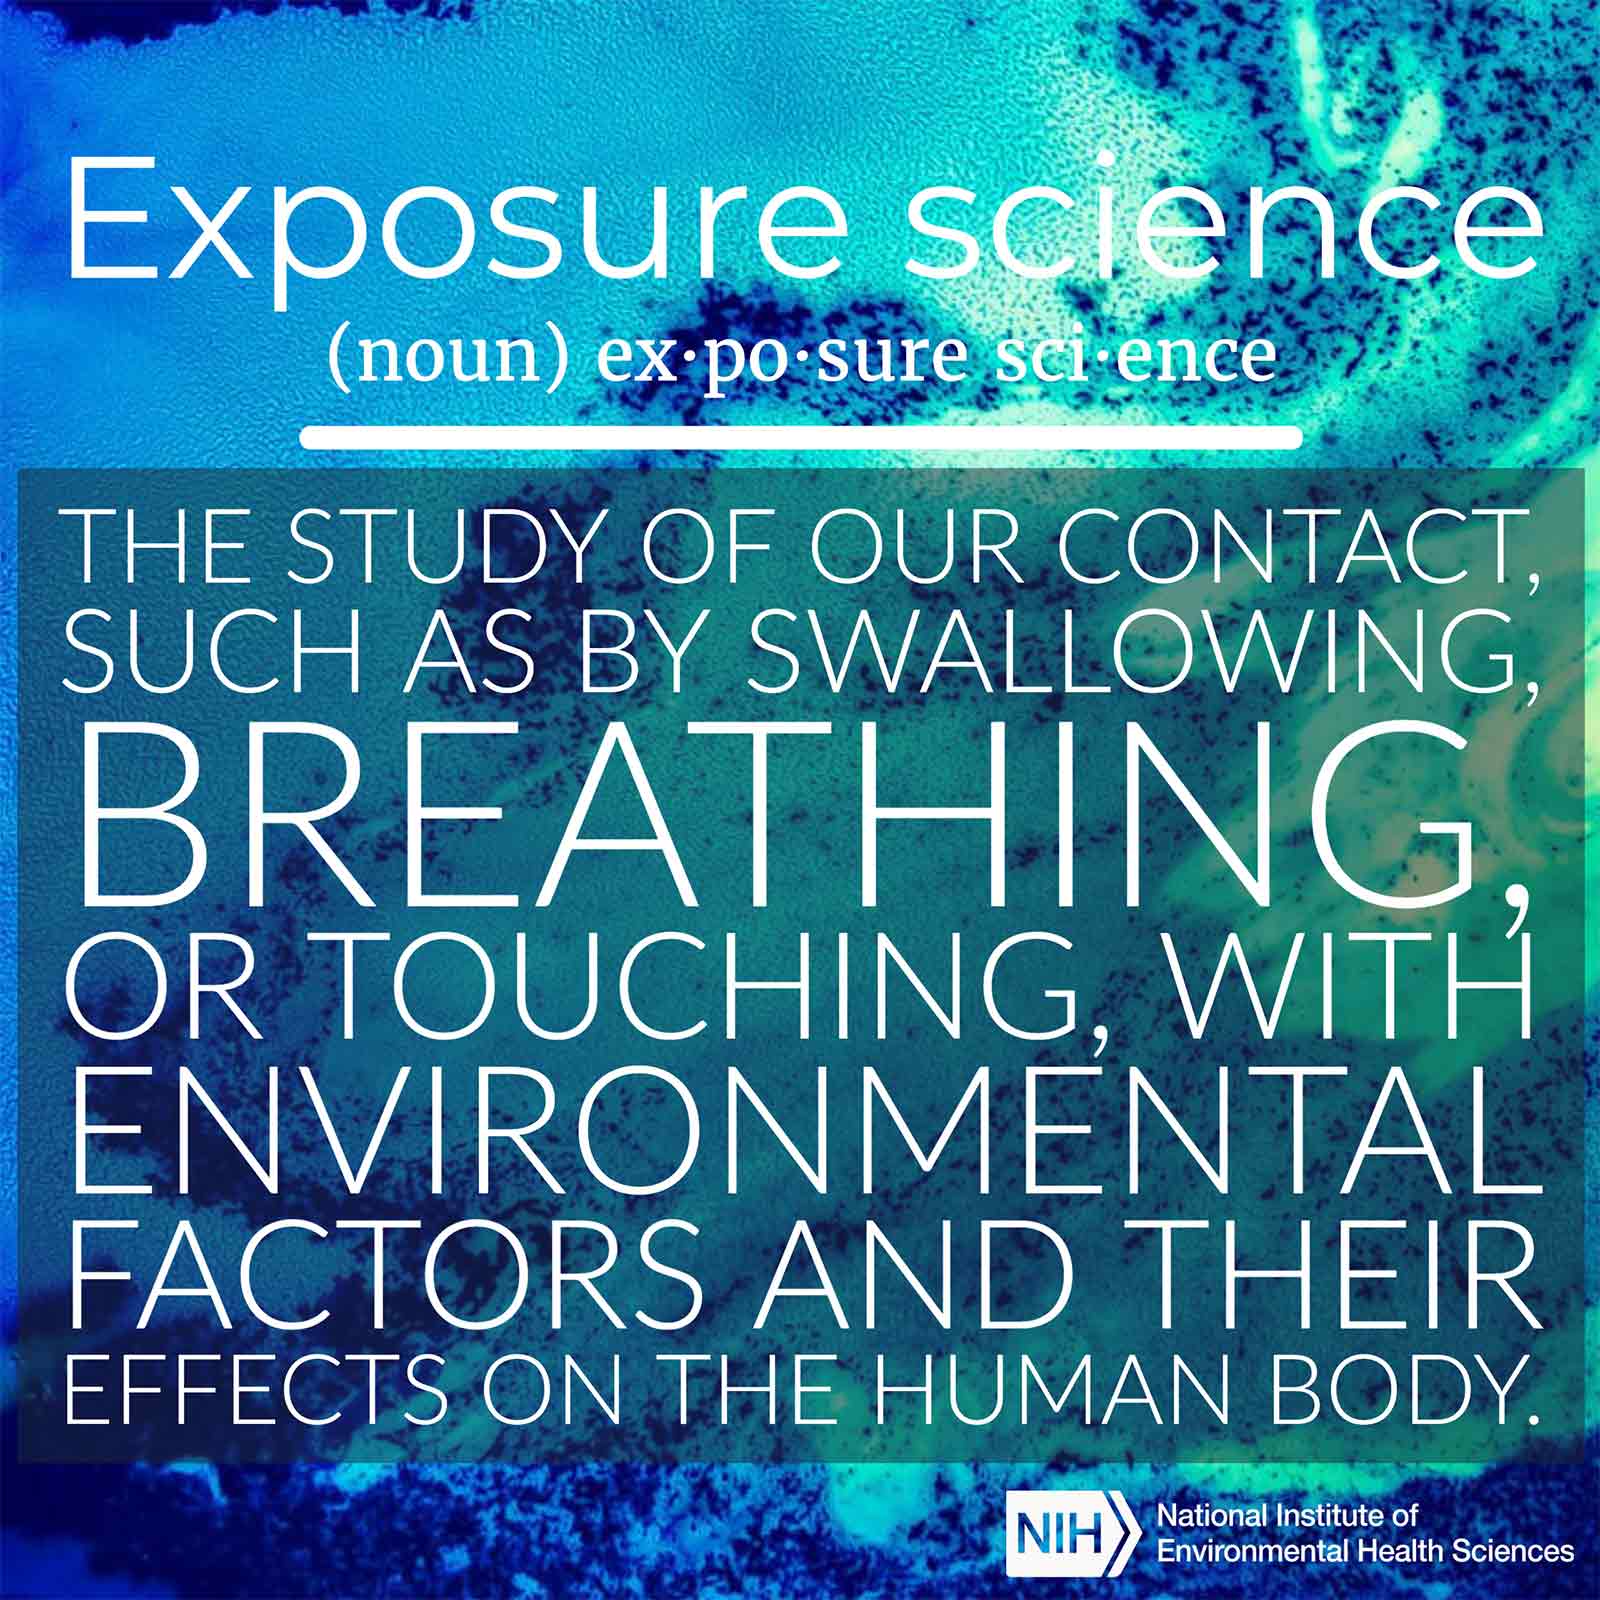 Exposure science (noun) defined as &#39;the study of our contact, such as by swallowing, breathing, or touching, with environmental factors and their effects on the human body.&#39;